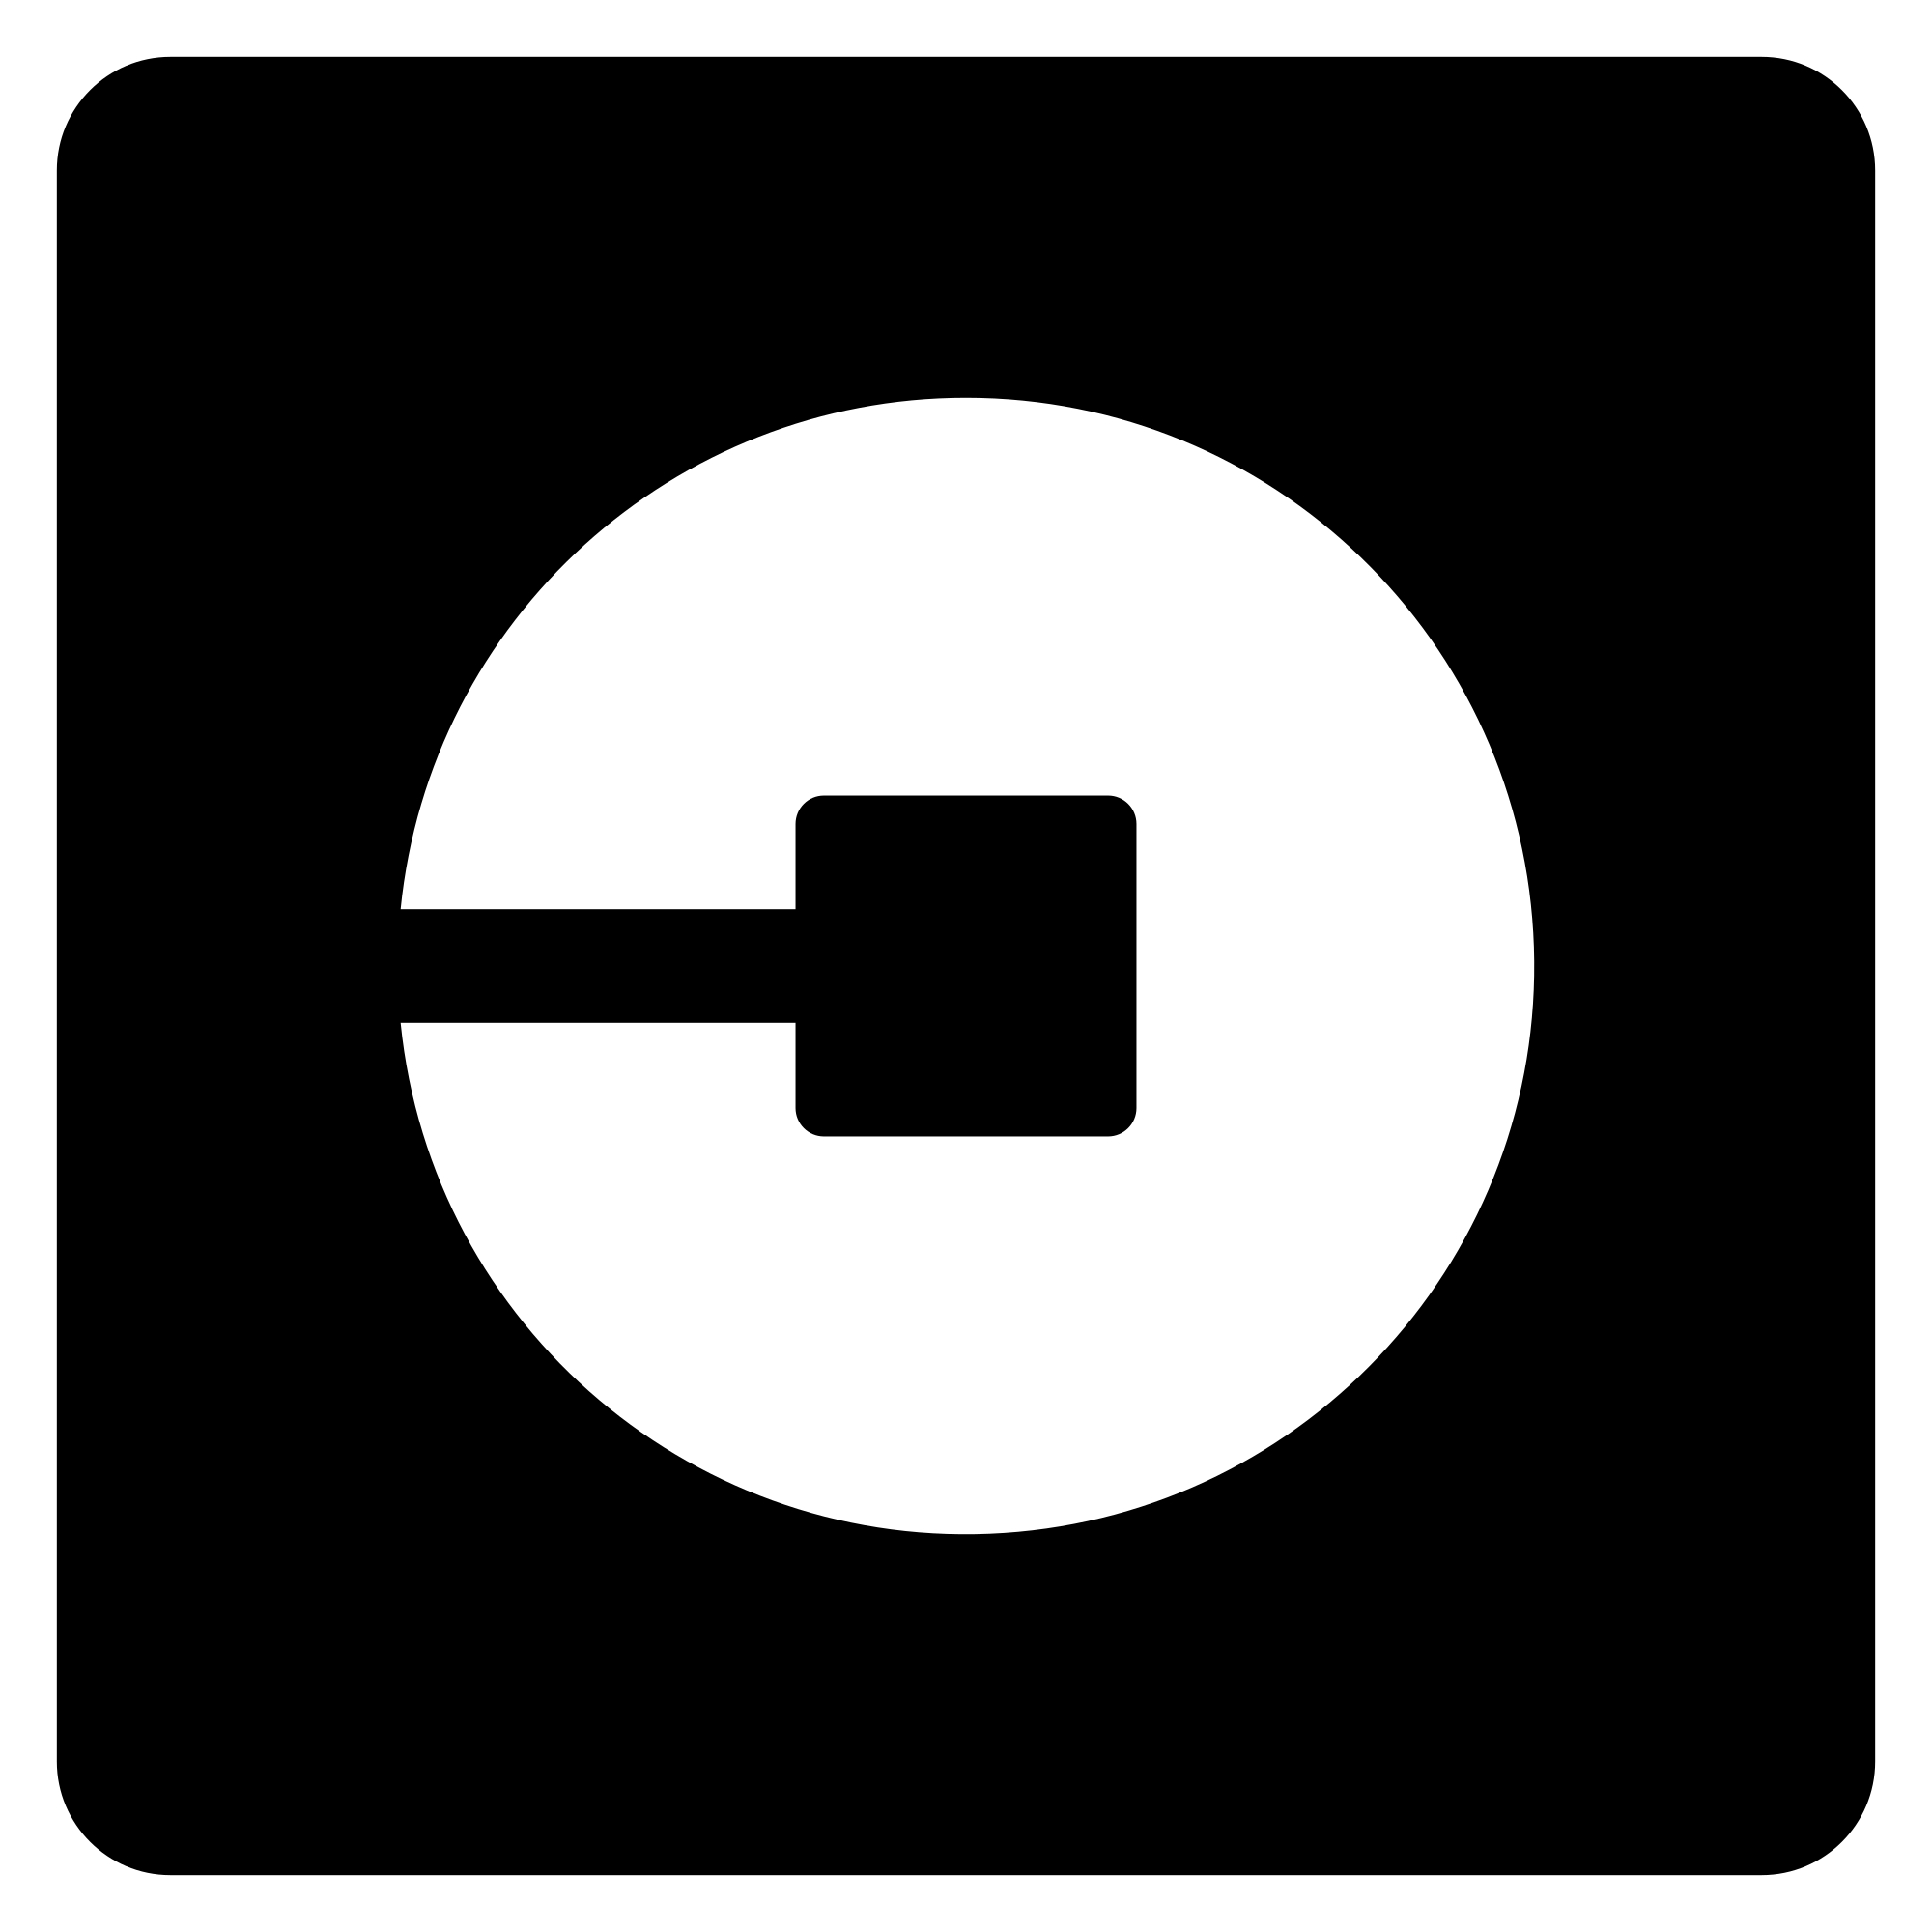 Uber and the Breach of Personal Data